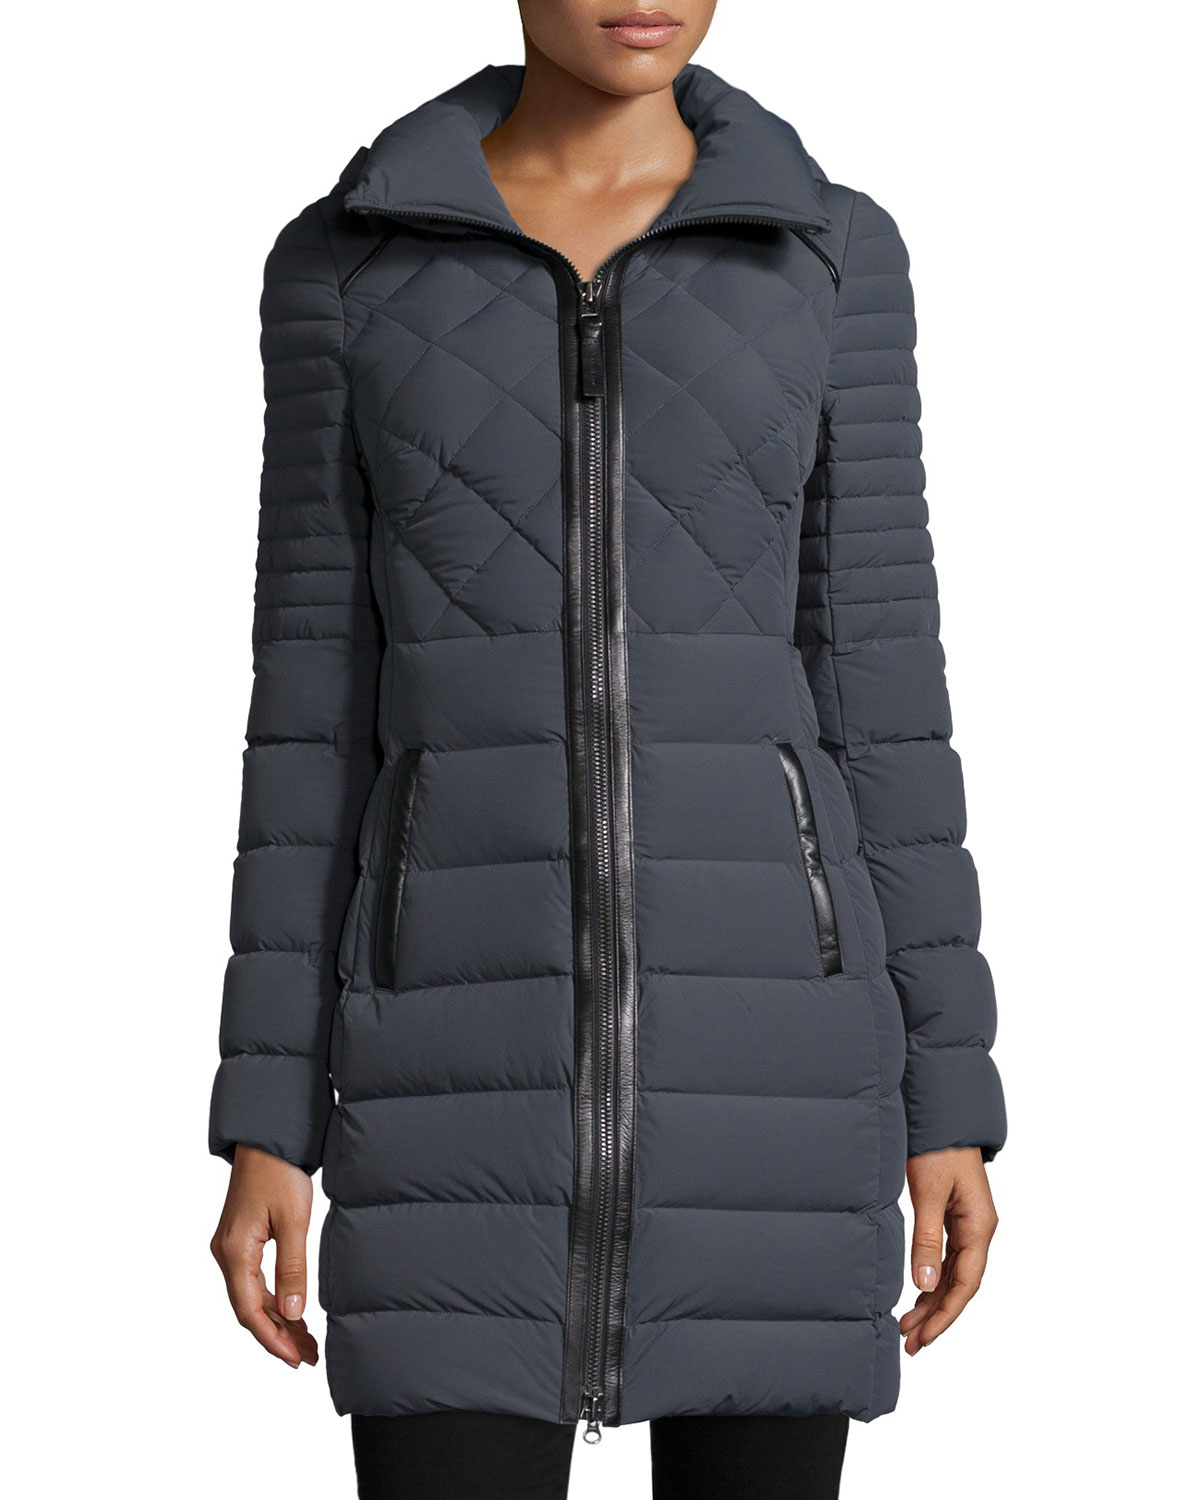 Lyst - Mackage Puffer Long Jacket With Leather Trim in Gray